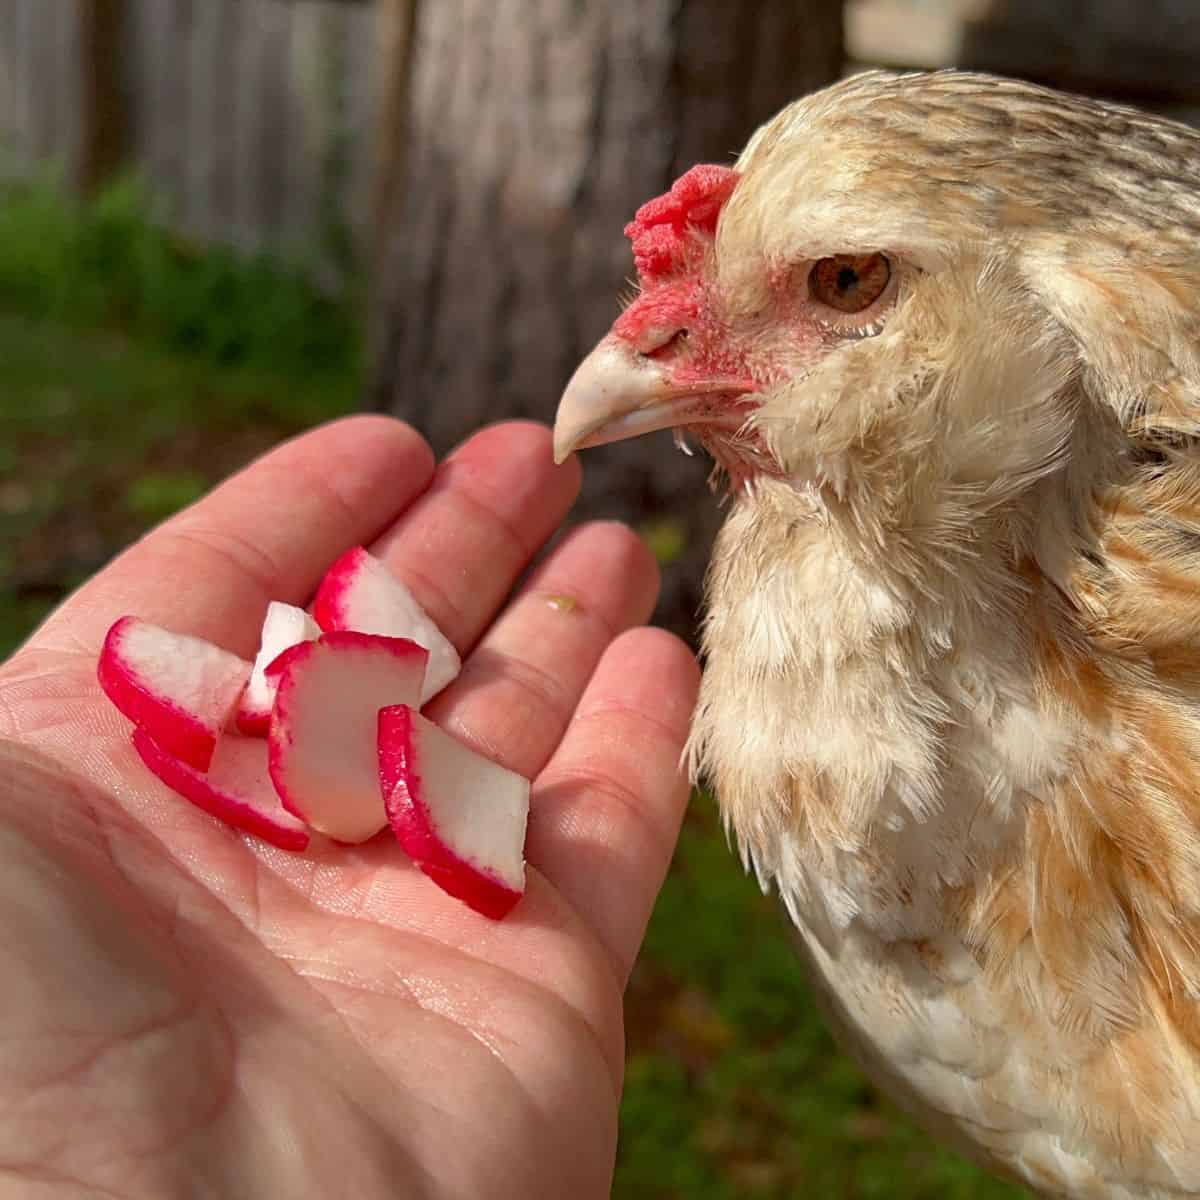 Chicken being held next to handful of radishes.